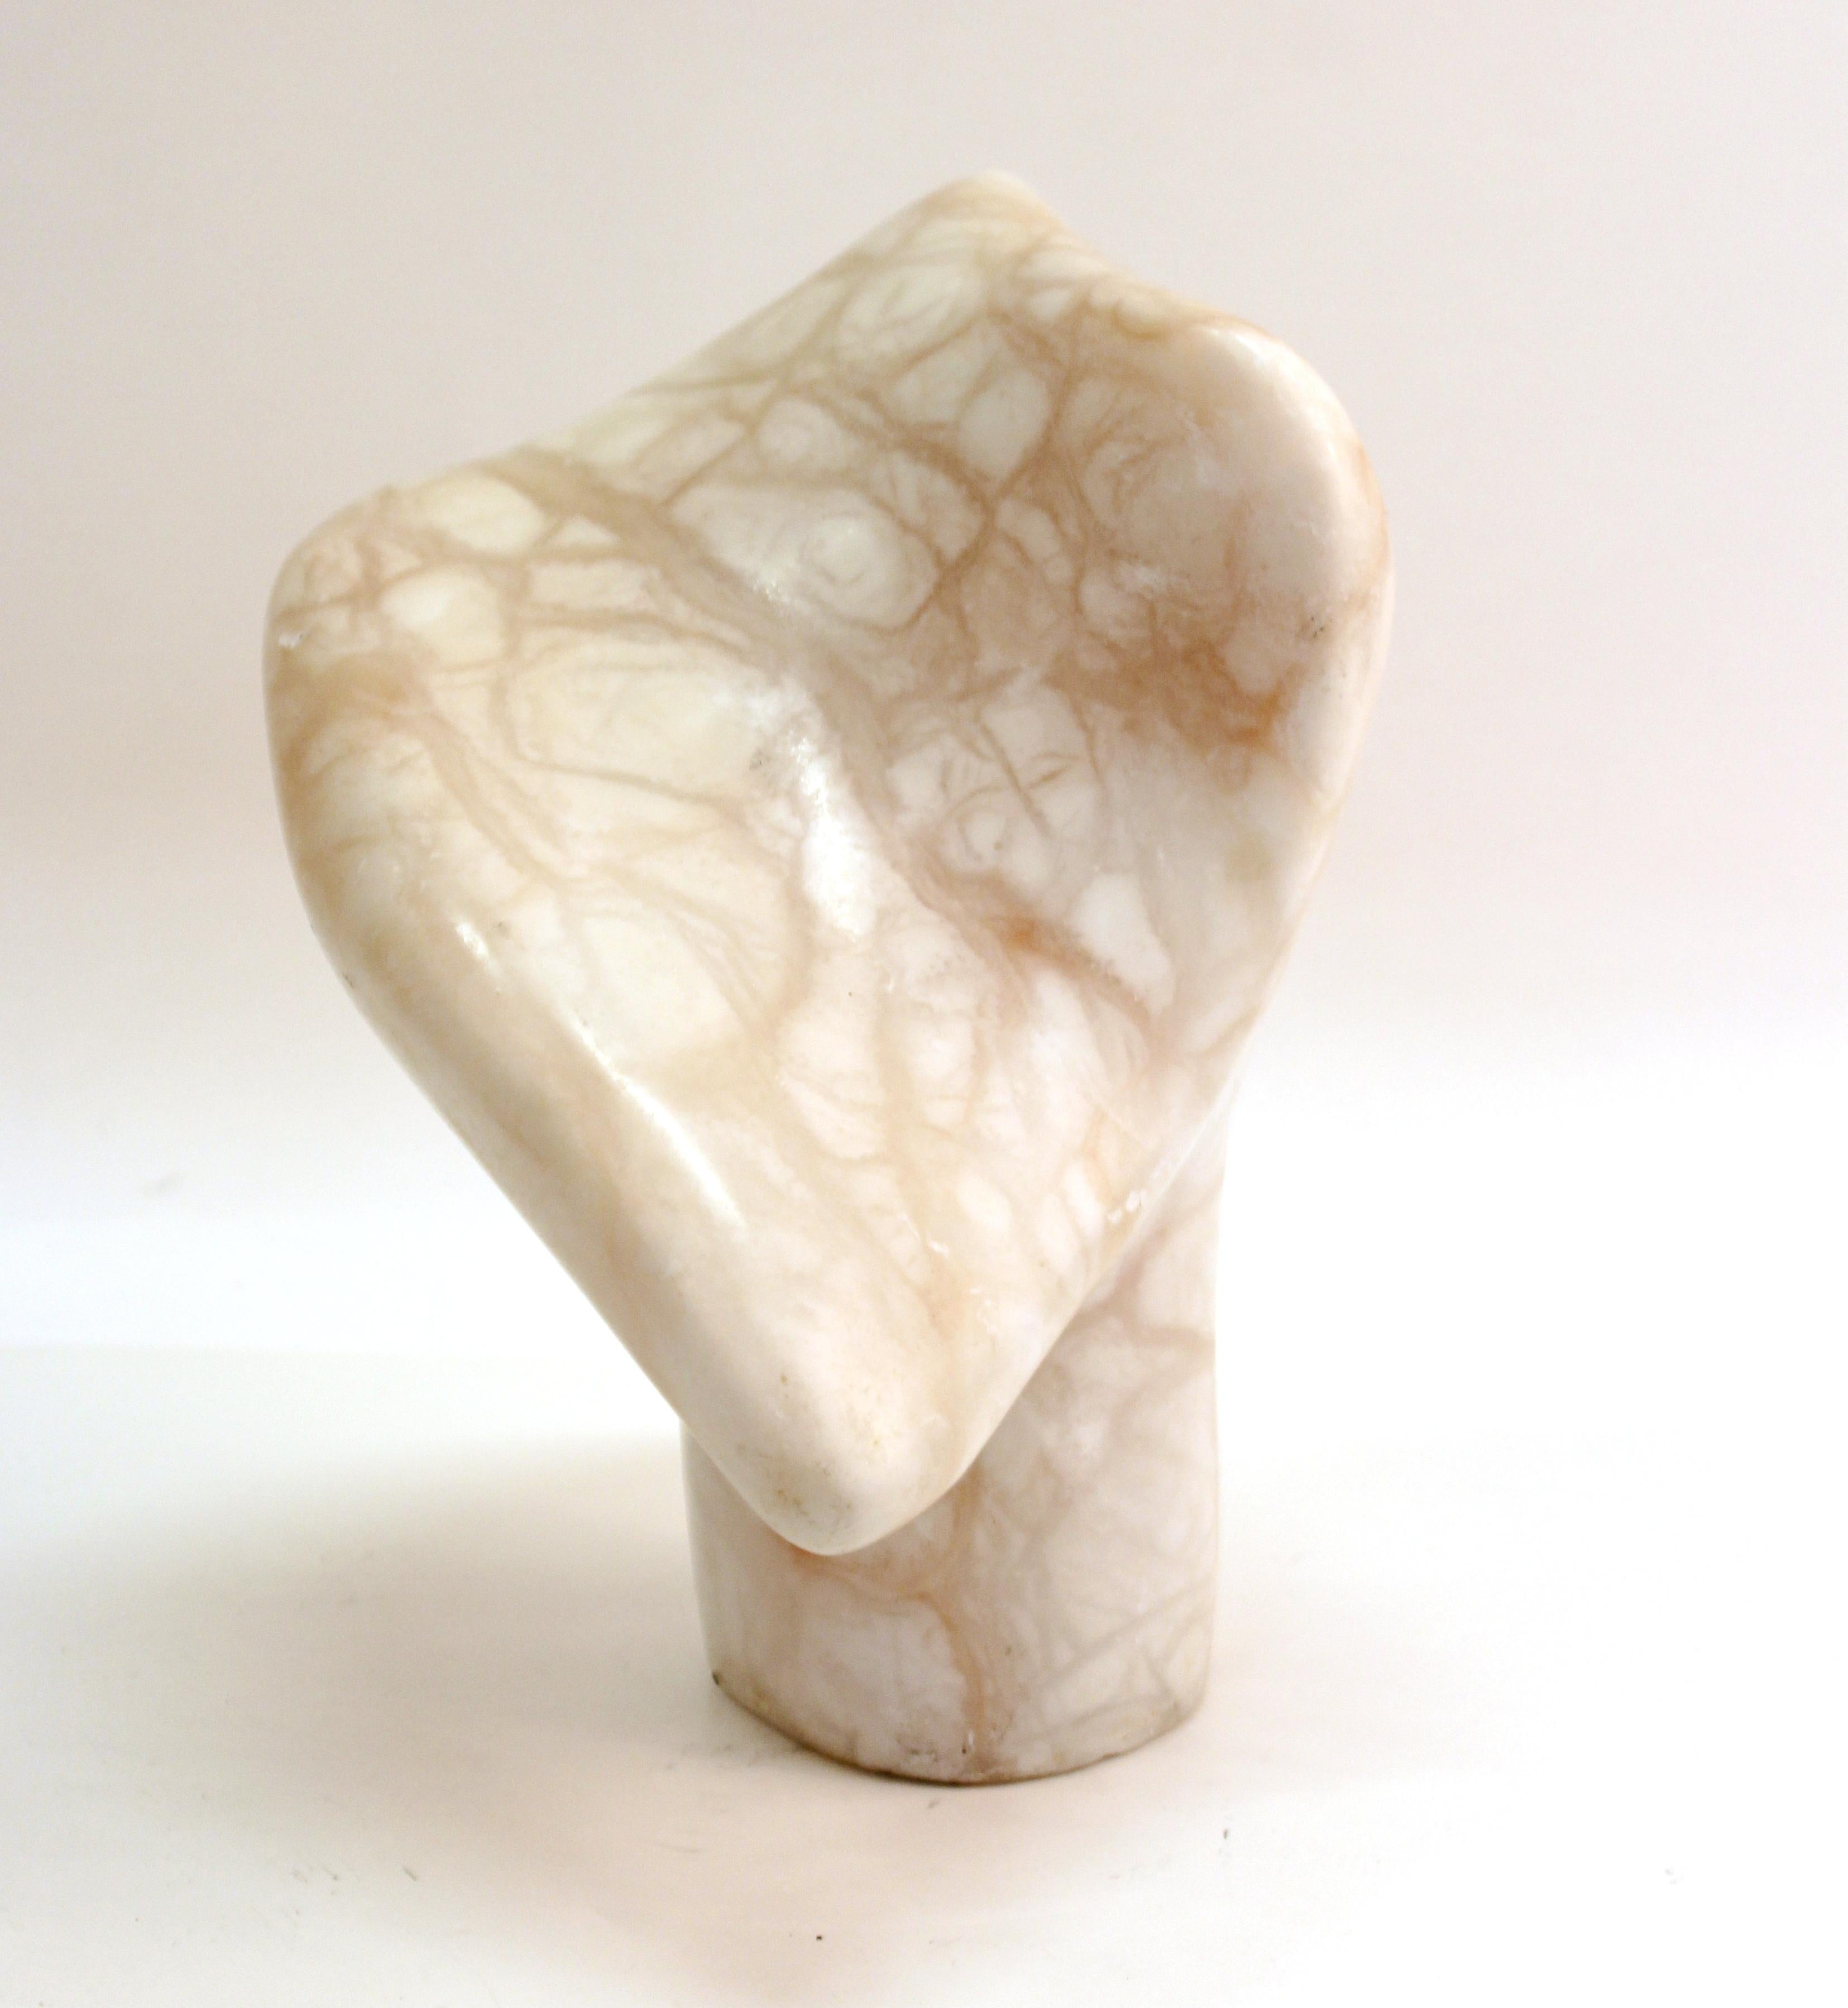 Modern abstract tabletop sculpture in biomorph shape, carved in veined off-white marble. The piece is unsigned and likely dates from the 1980s. In great vintage condition with age, appropriate wear and use.